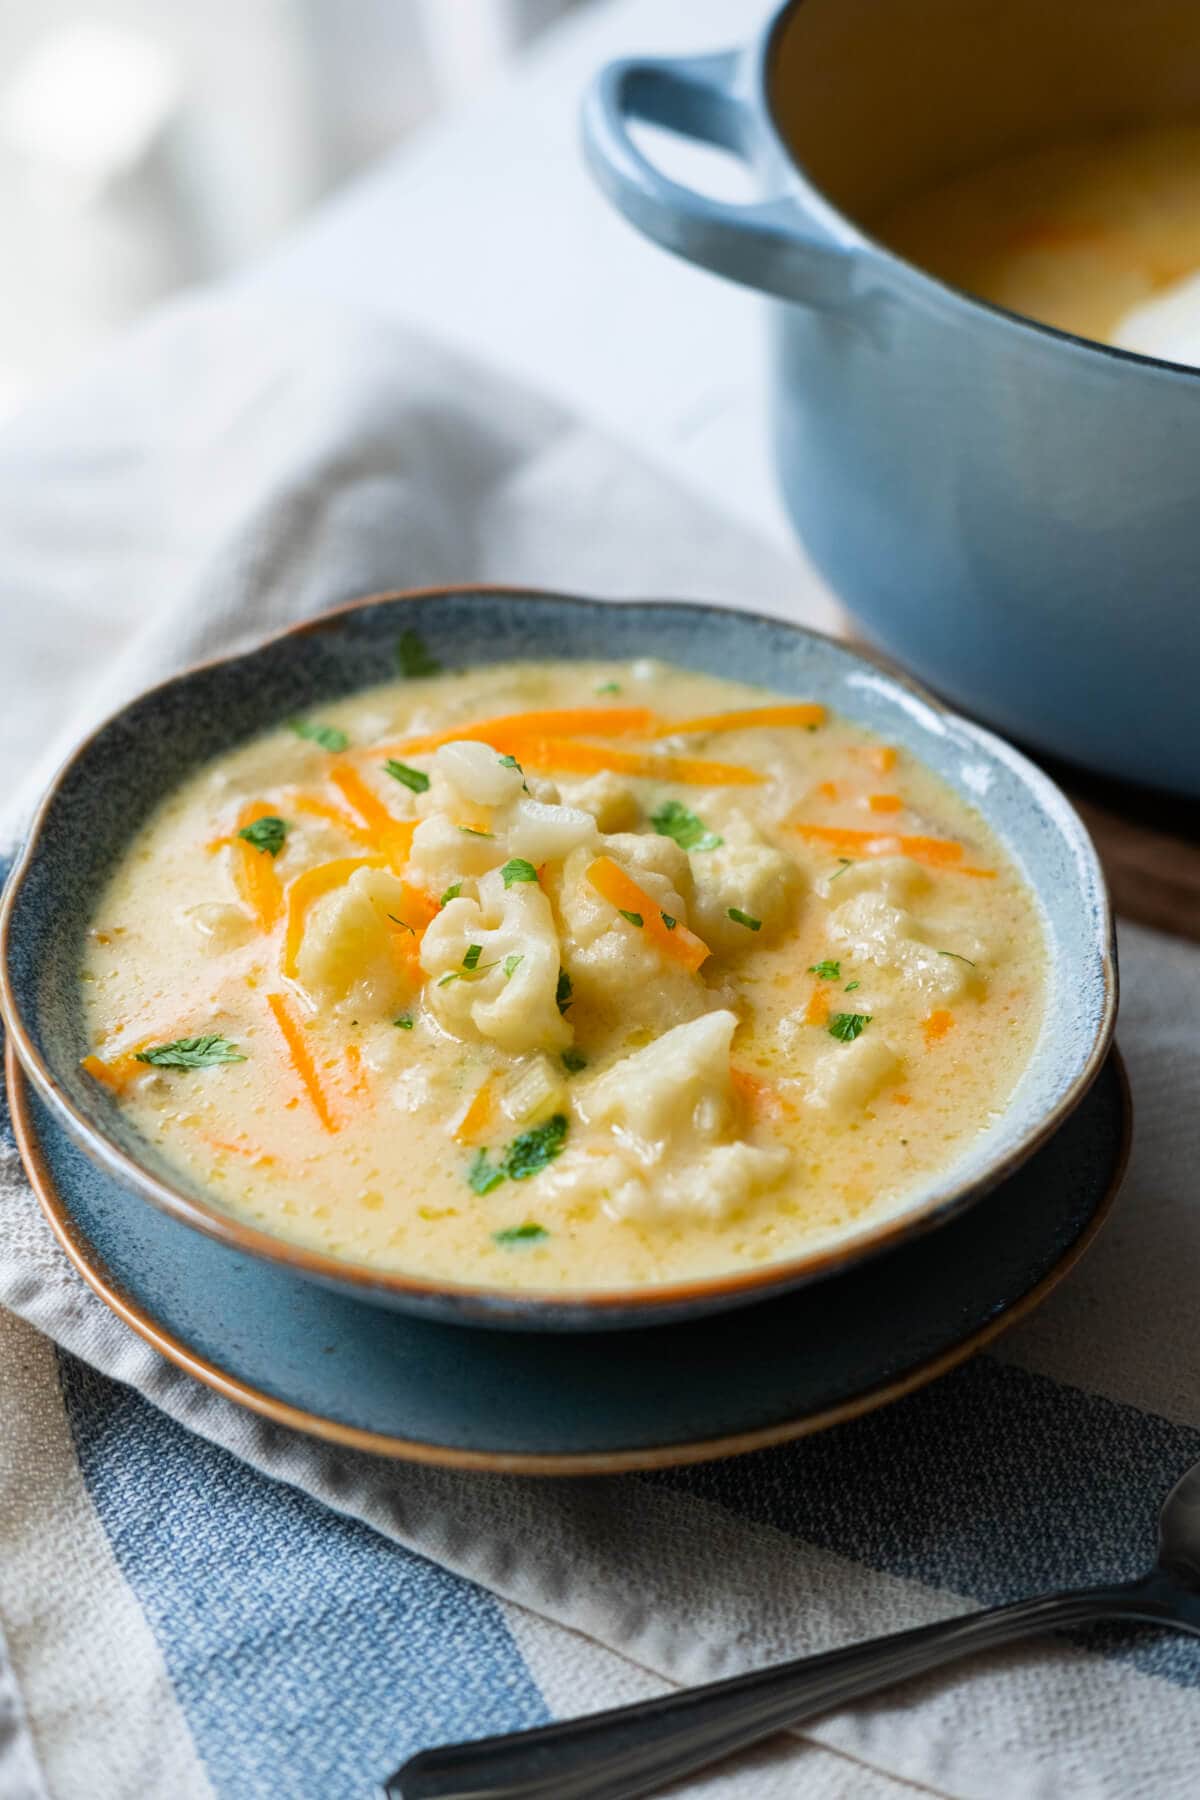 Delicious creamy yellow soup with cauliflower florets and carrot shreds served in a small bowl. 